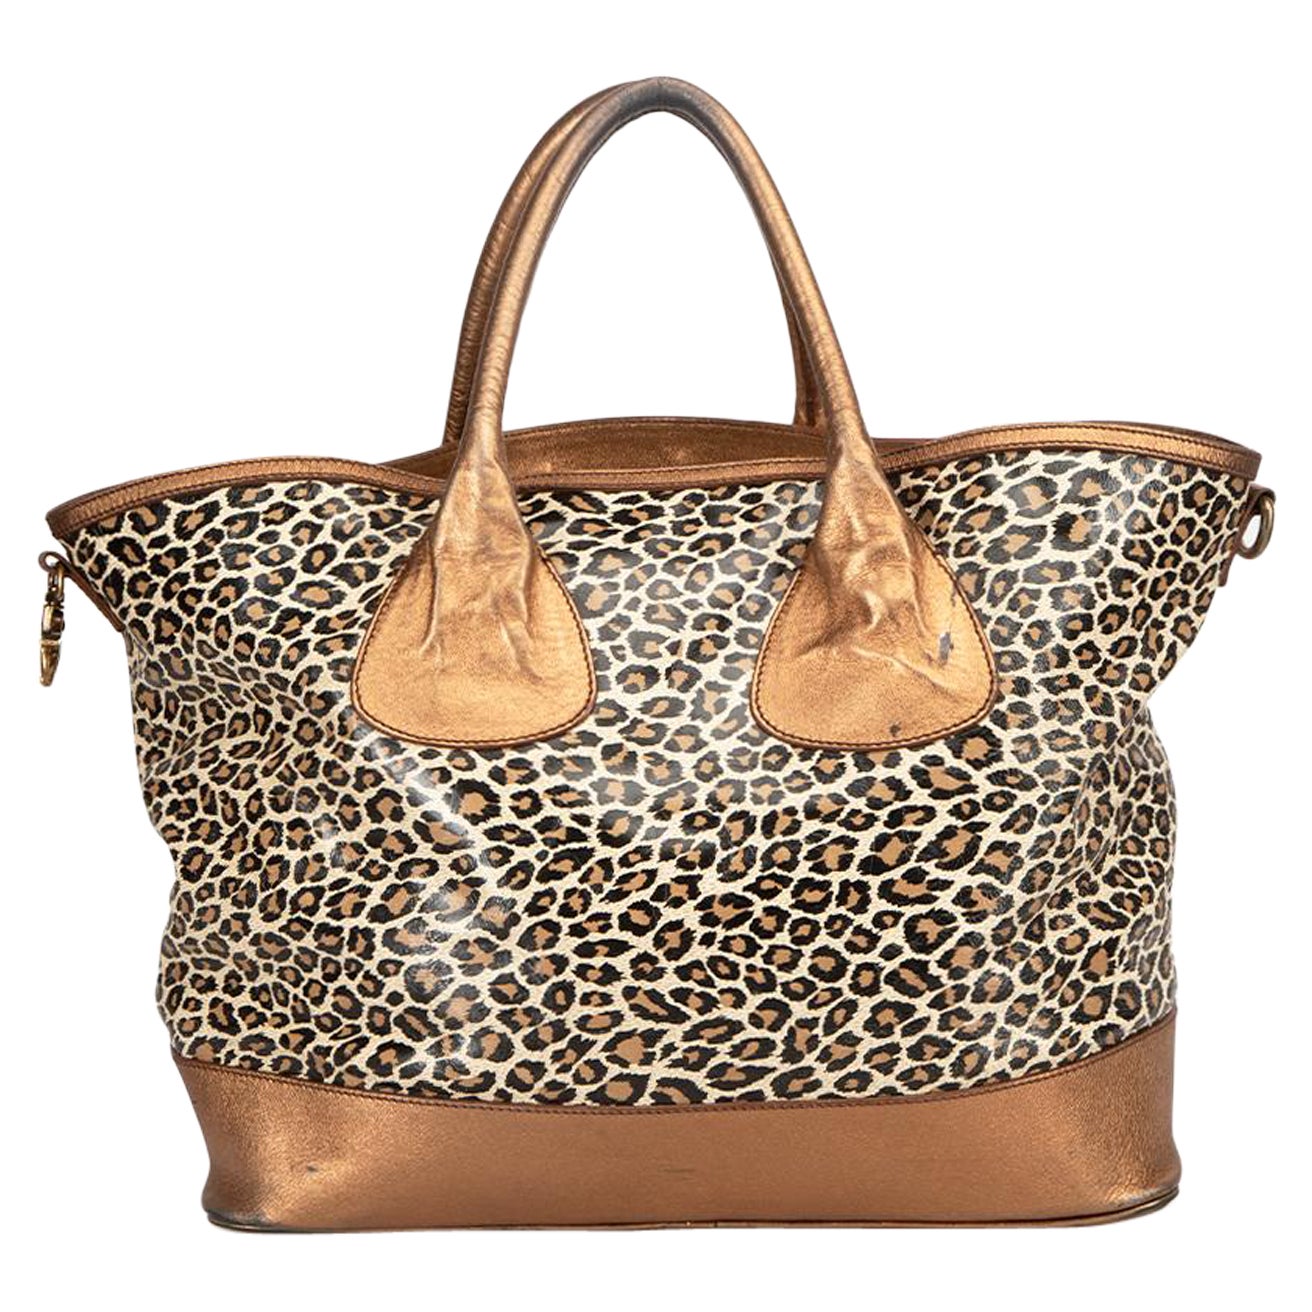 Dolce and Gabbana Women's D&G Bronze Leather Leopard Print Tote